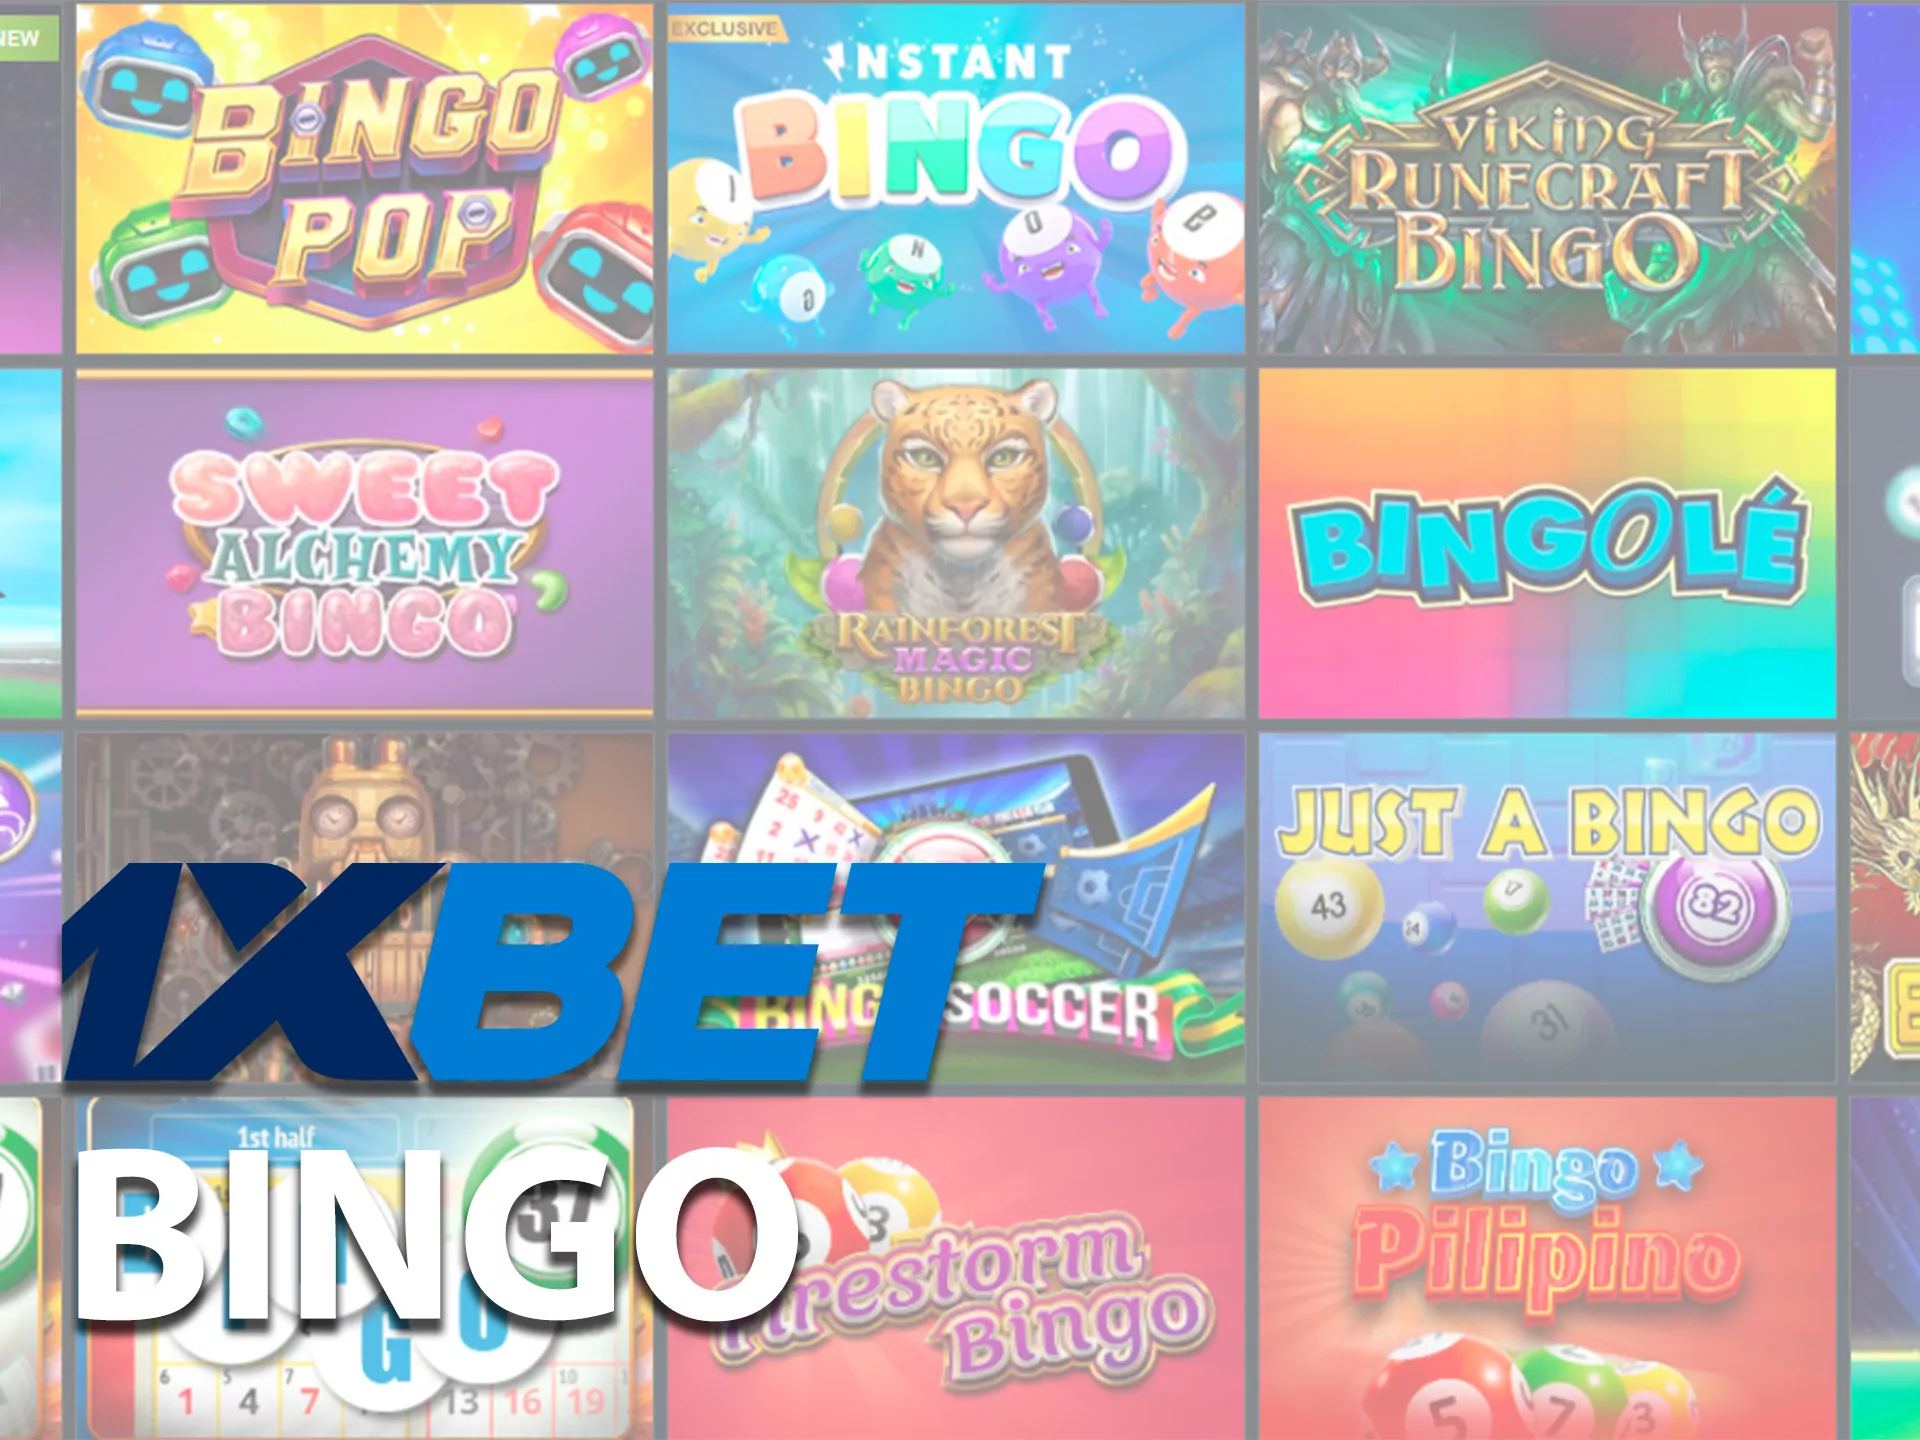 You can play bingo games too at the 1xvet online casino.